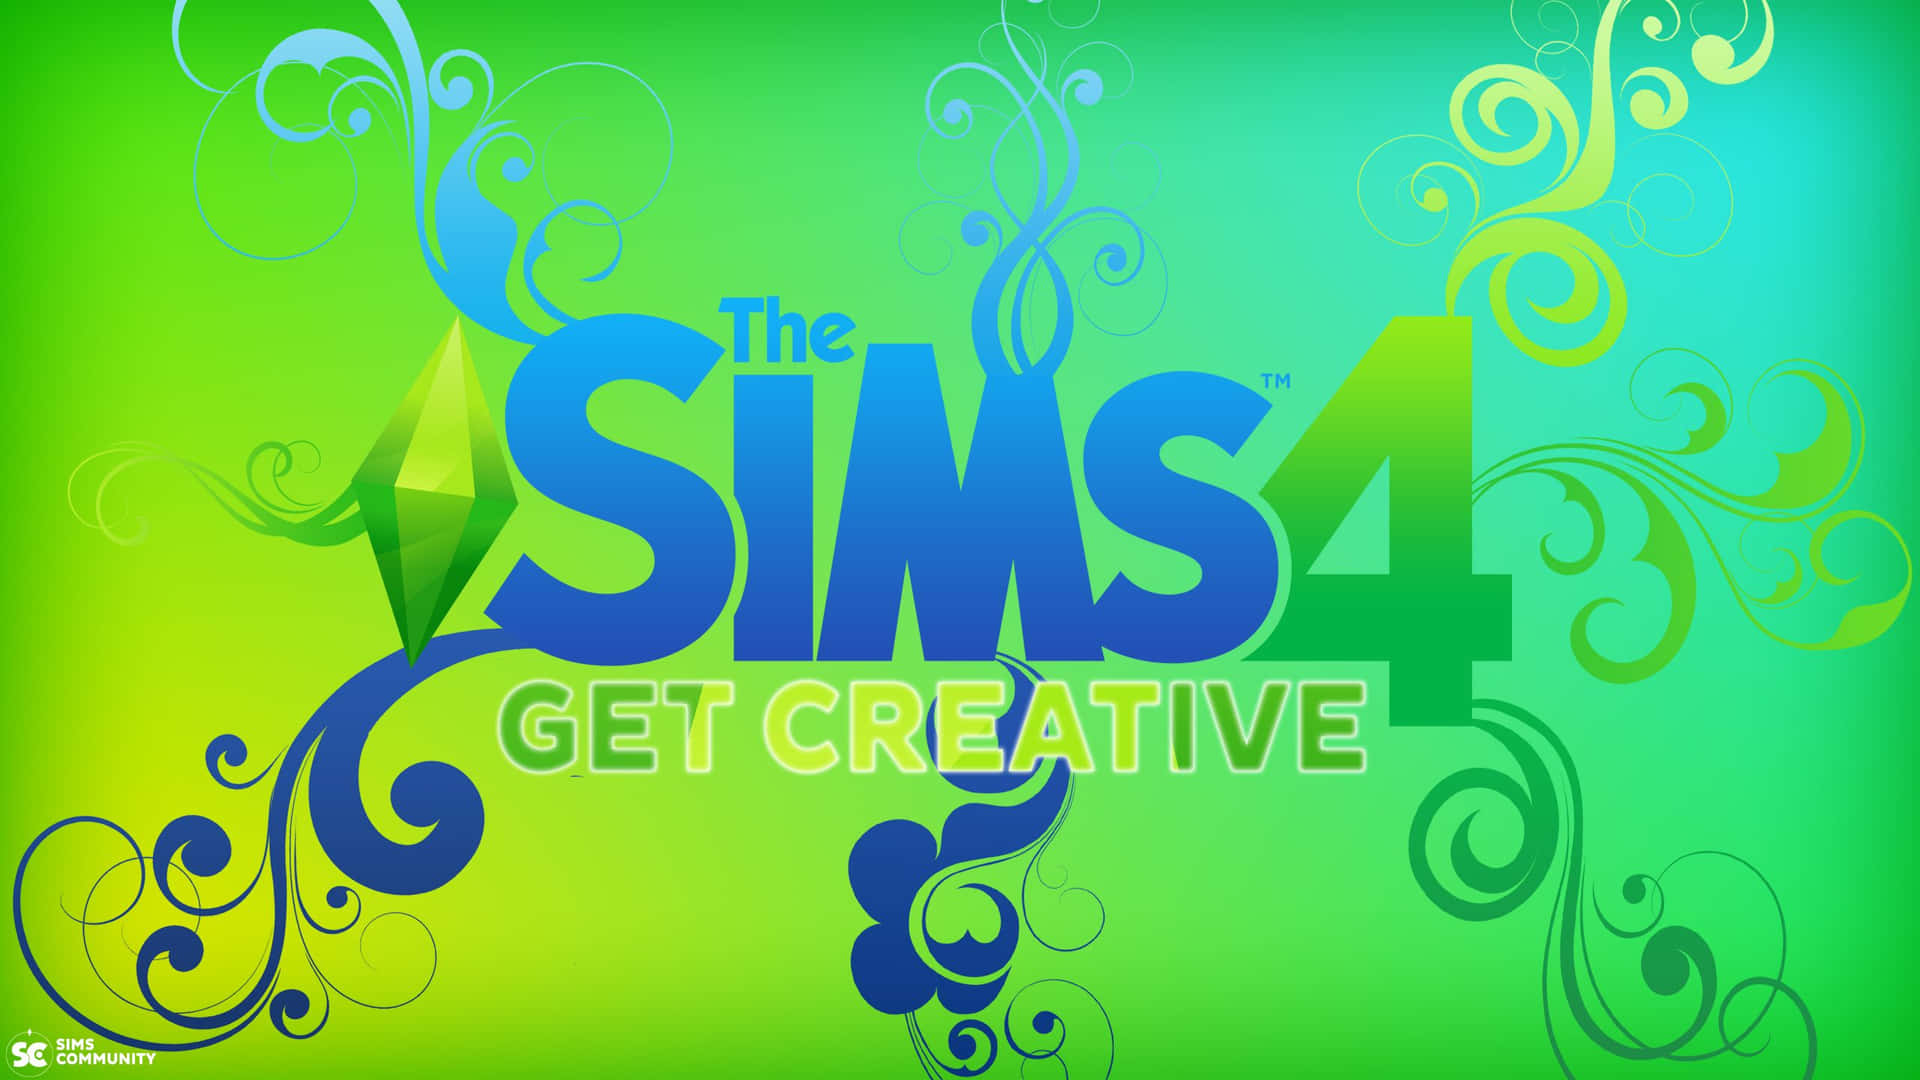 The Sims 4 - Colorful Character Creation Scene Wallpaper